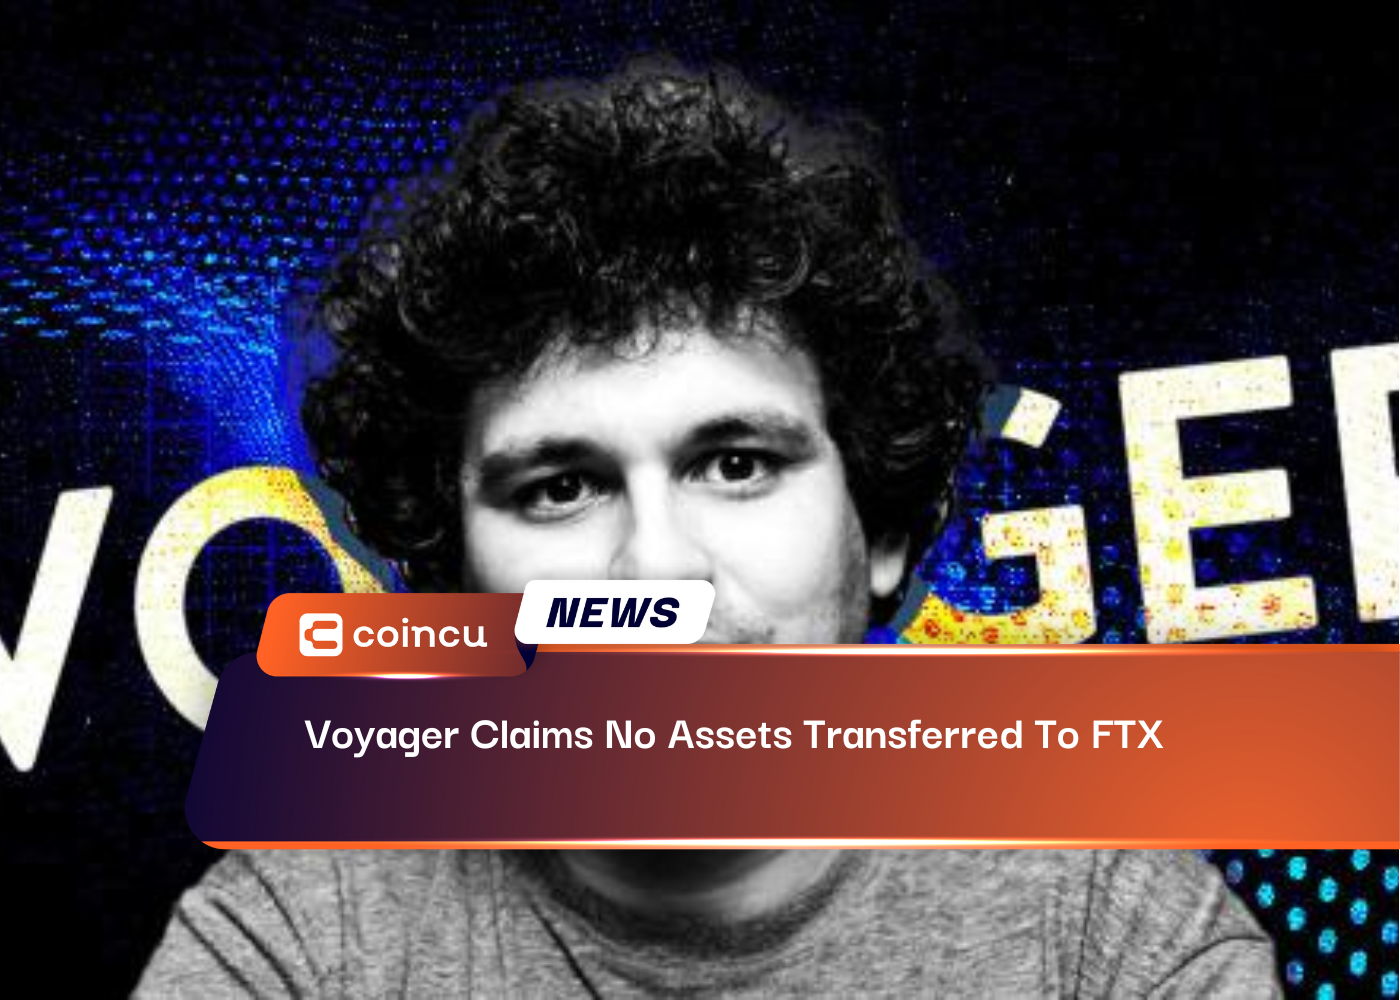 Voyager Claims No Assets Transferred To FTX